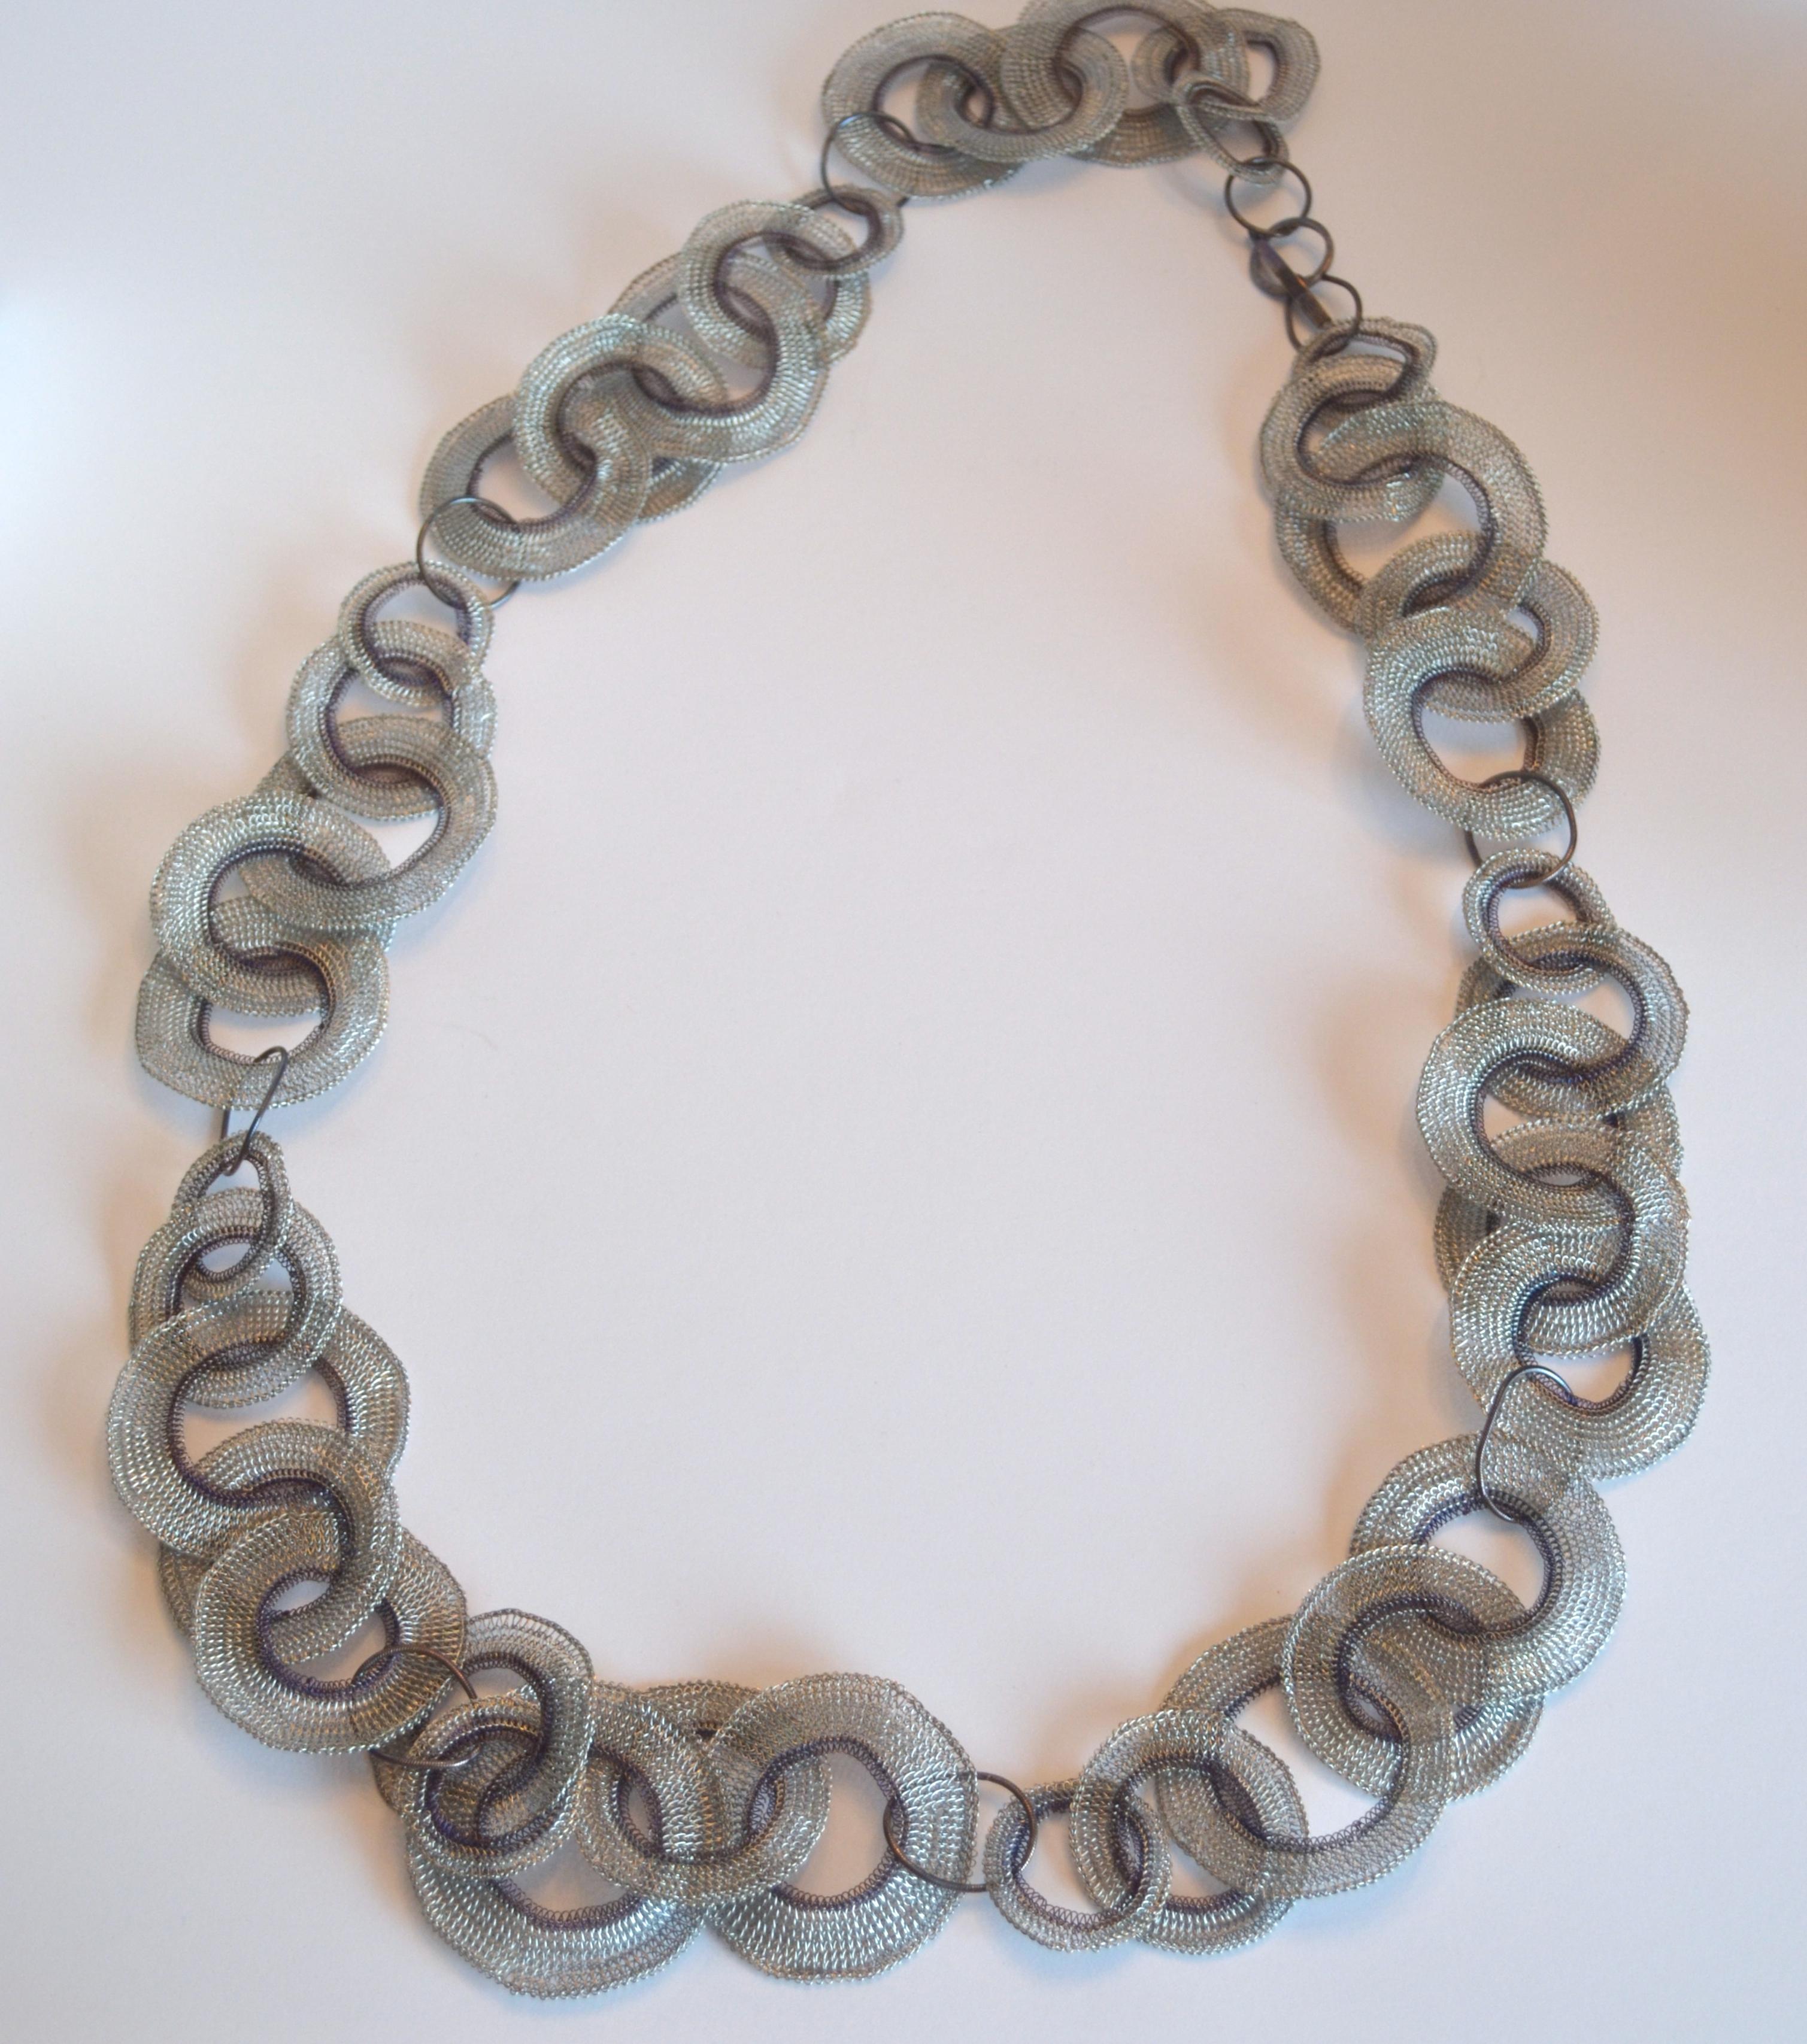 Chain style mesh necklace dipped in sterling silver from Milena Zu. 